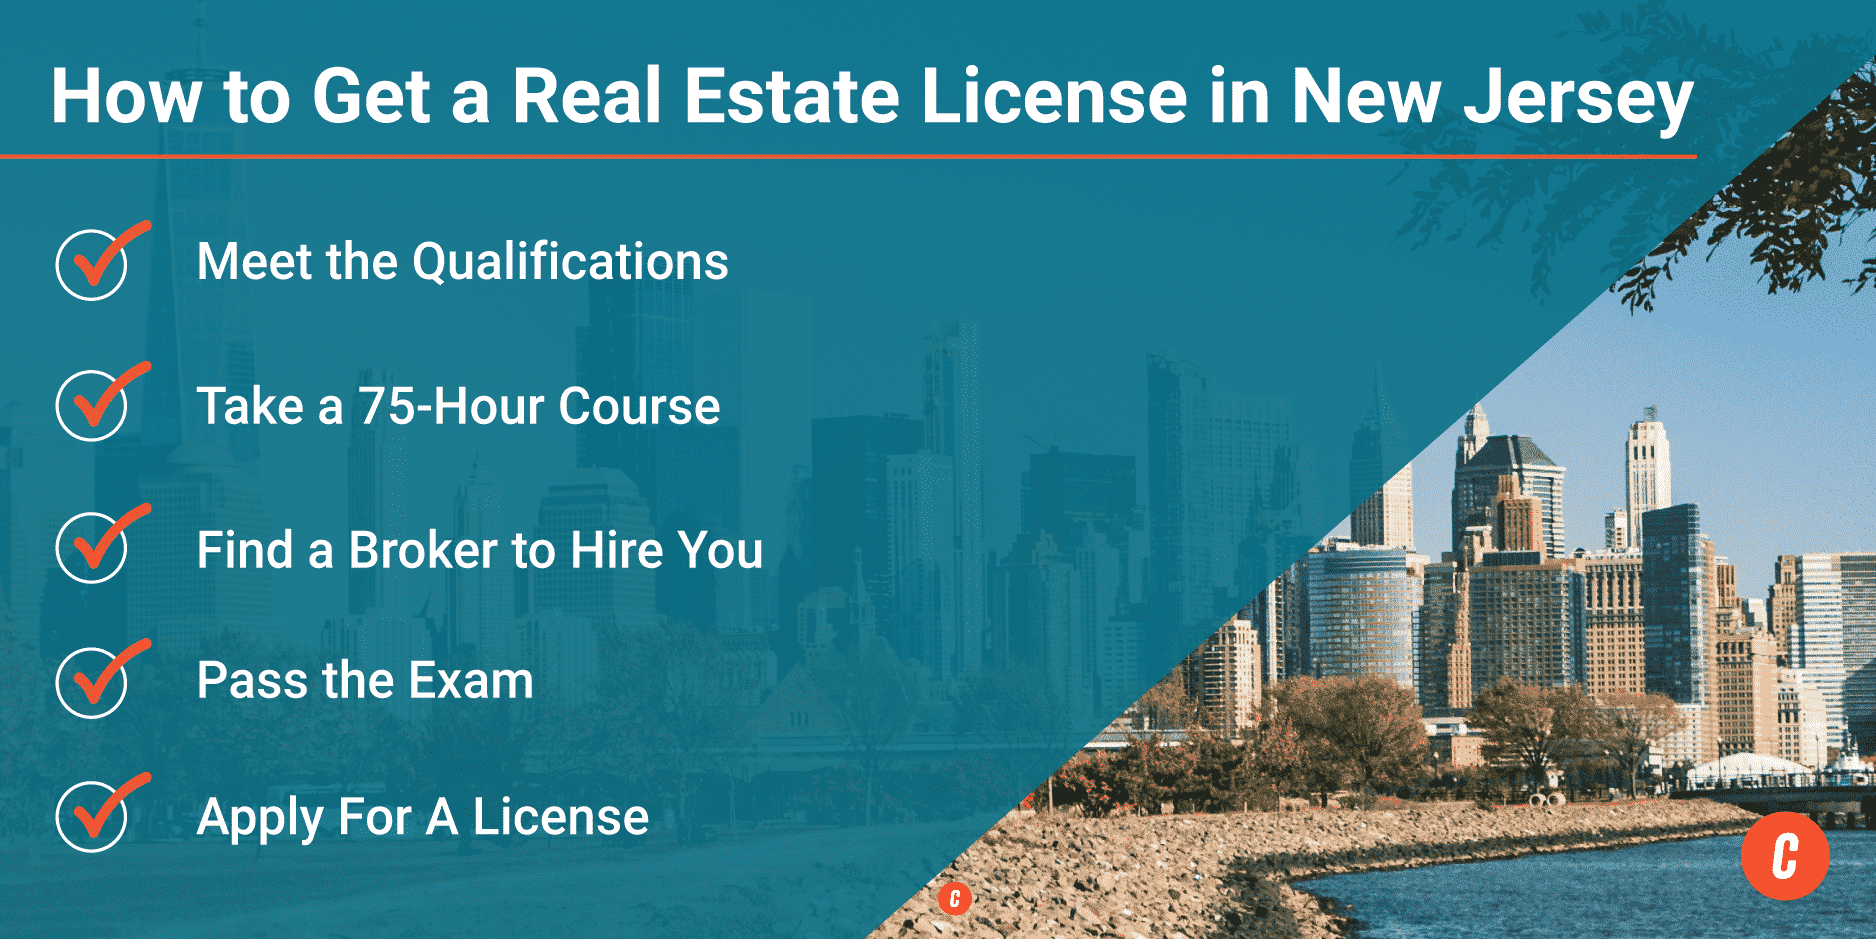 Infographic - How to Get a Real Estate License in New Jersey